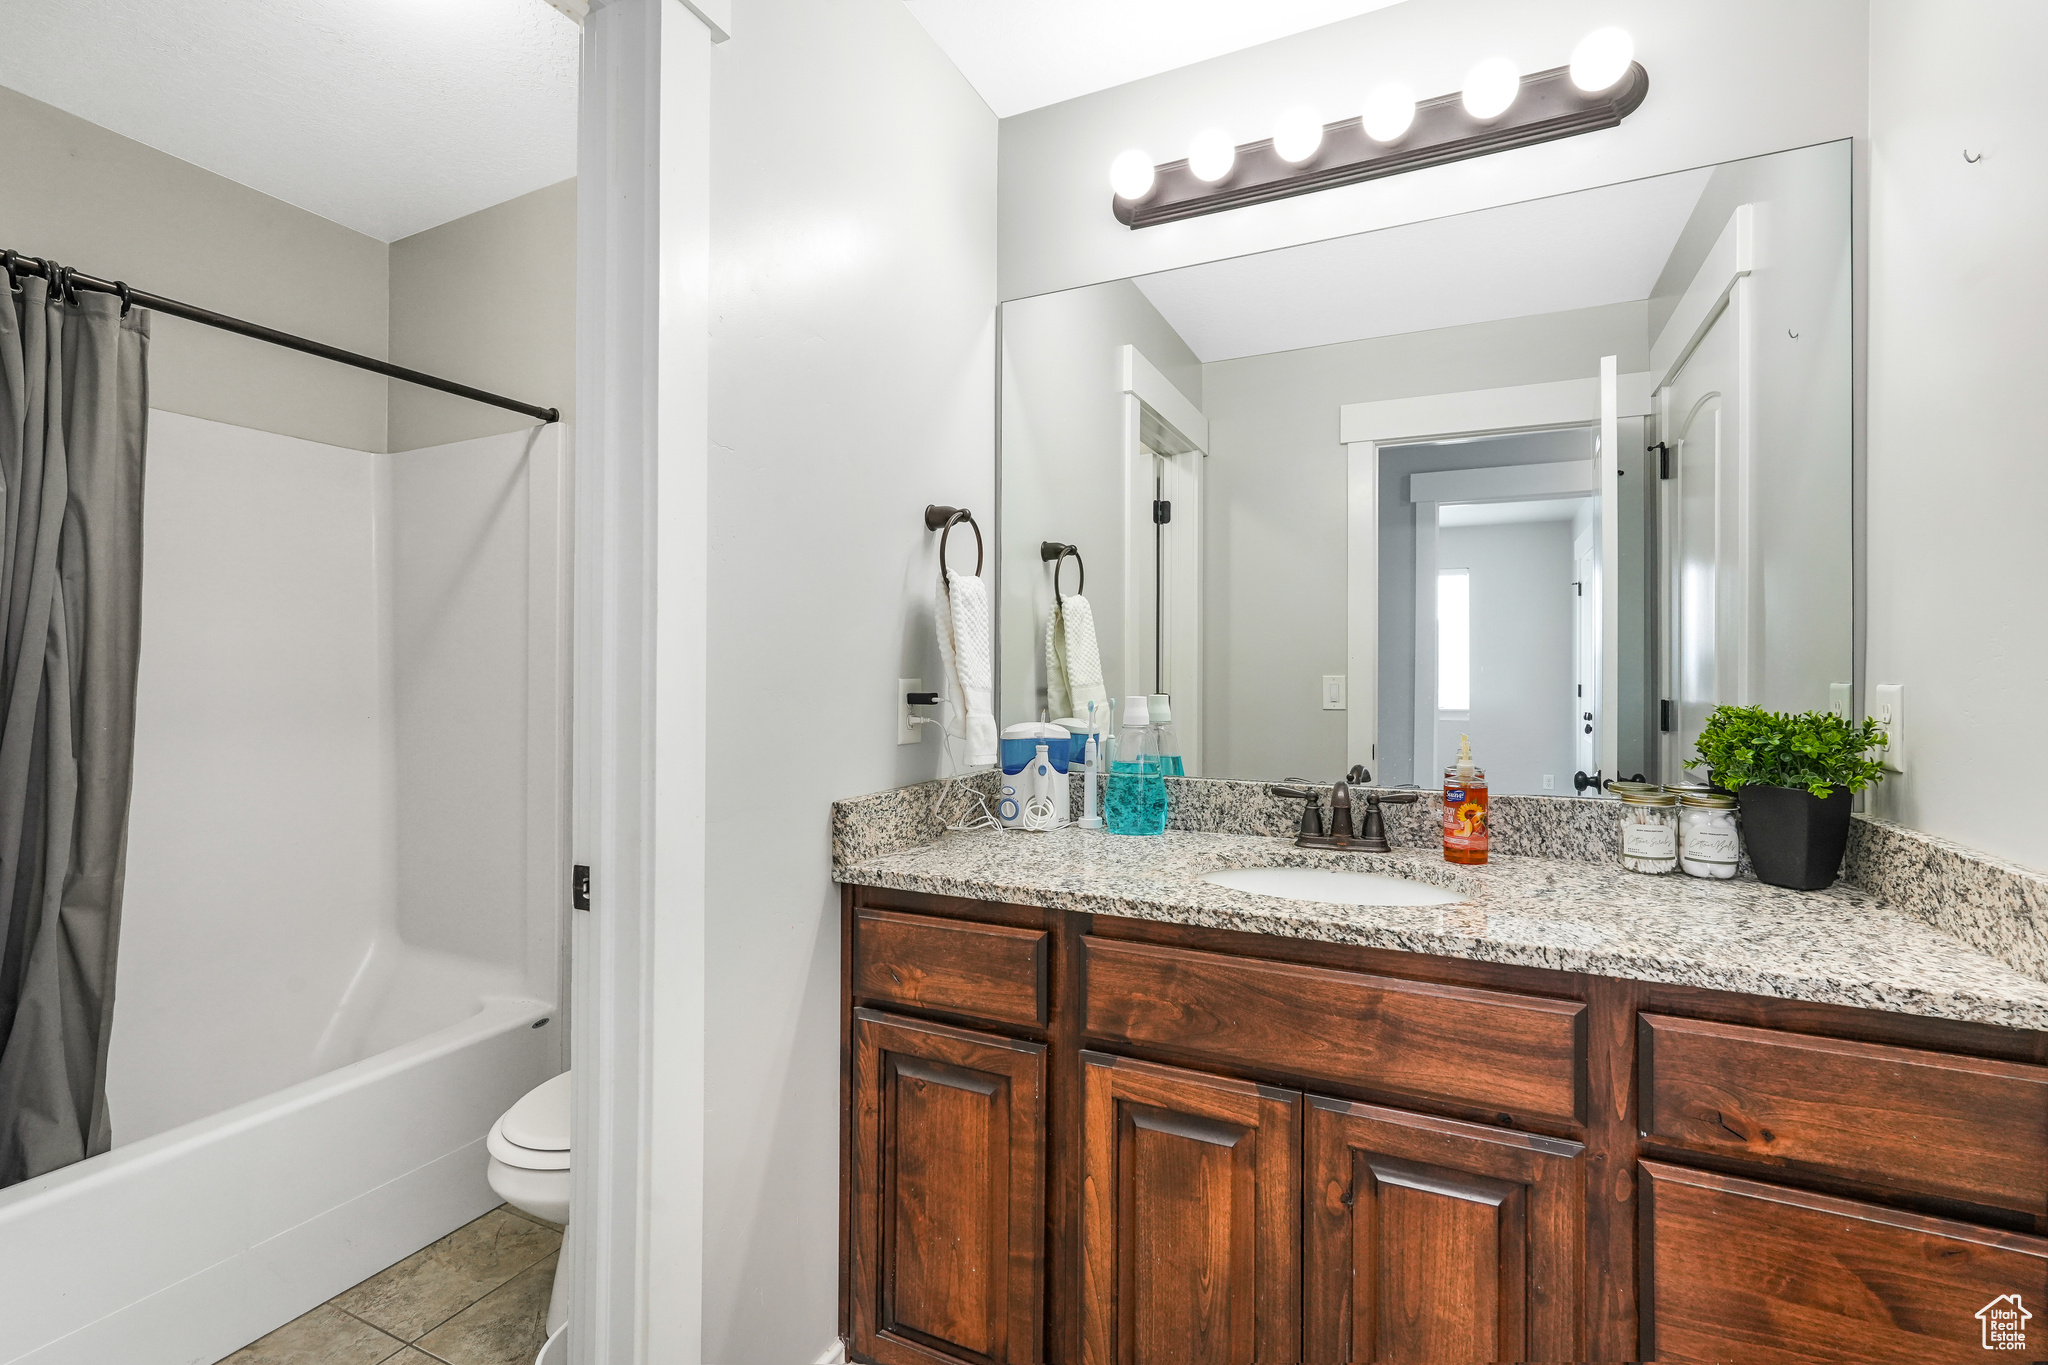 Hall bath on 2nd story with separate tub/shower combo from the comfort height vanity and linen closet.